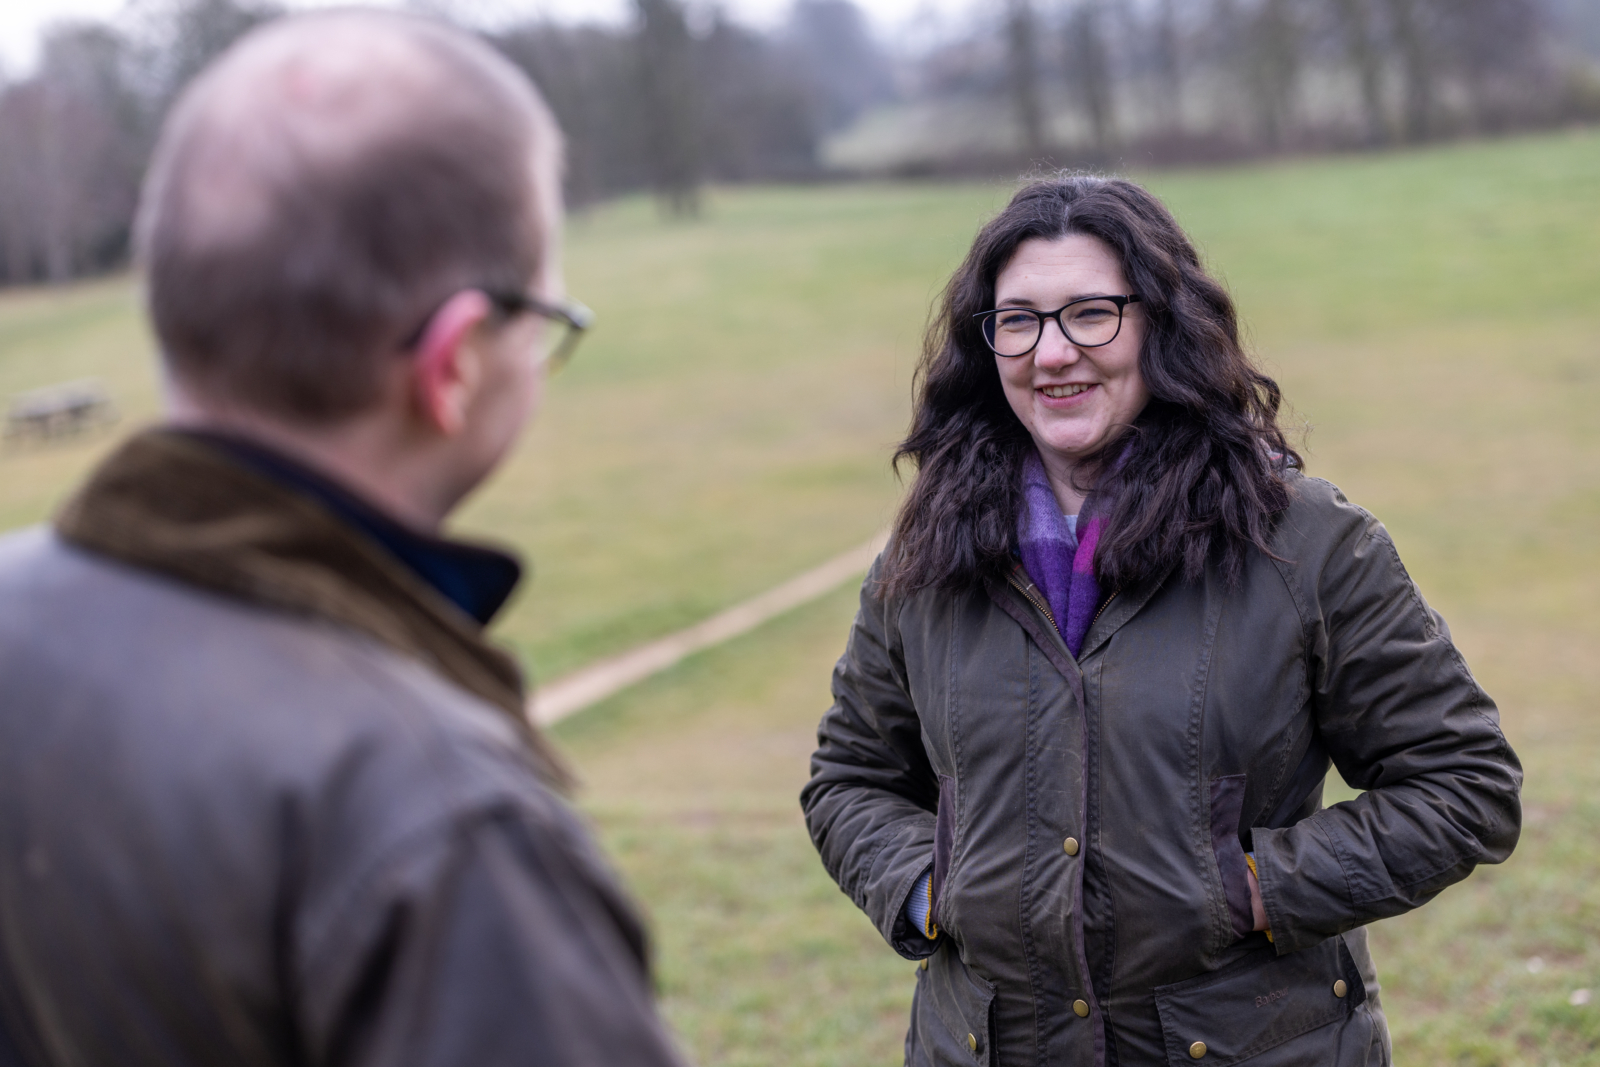 two people standing in a field, one man and one woman. Both wearing green coats. The lady has her hands in her pockets and is smiling at the man. They are having a conversation